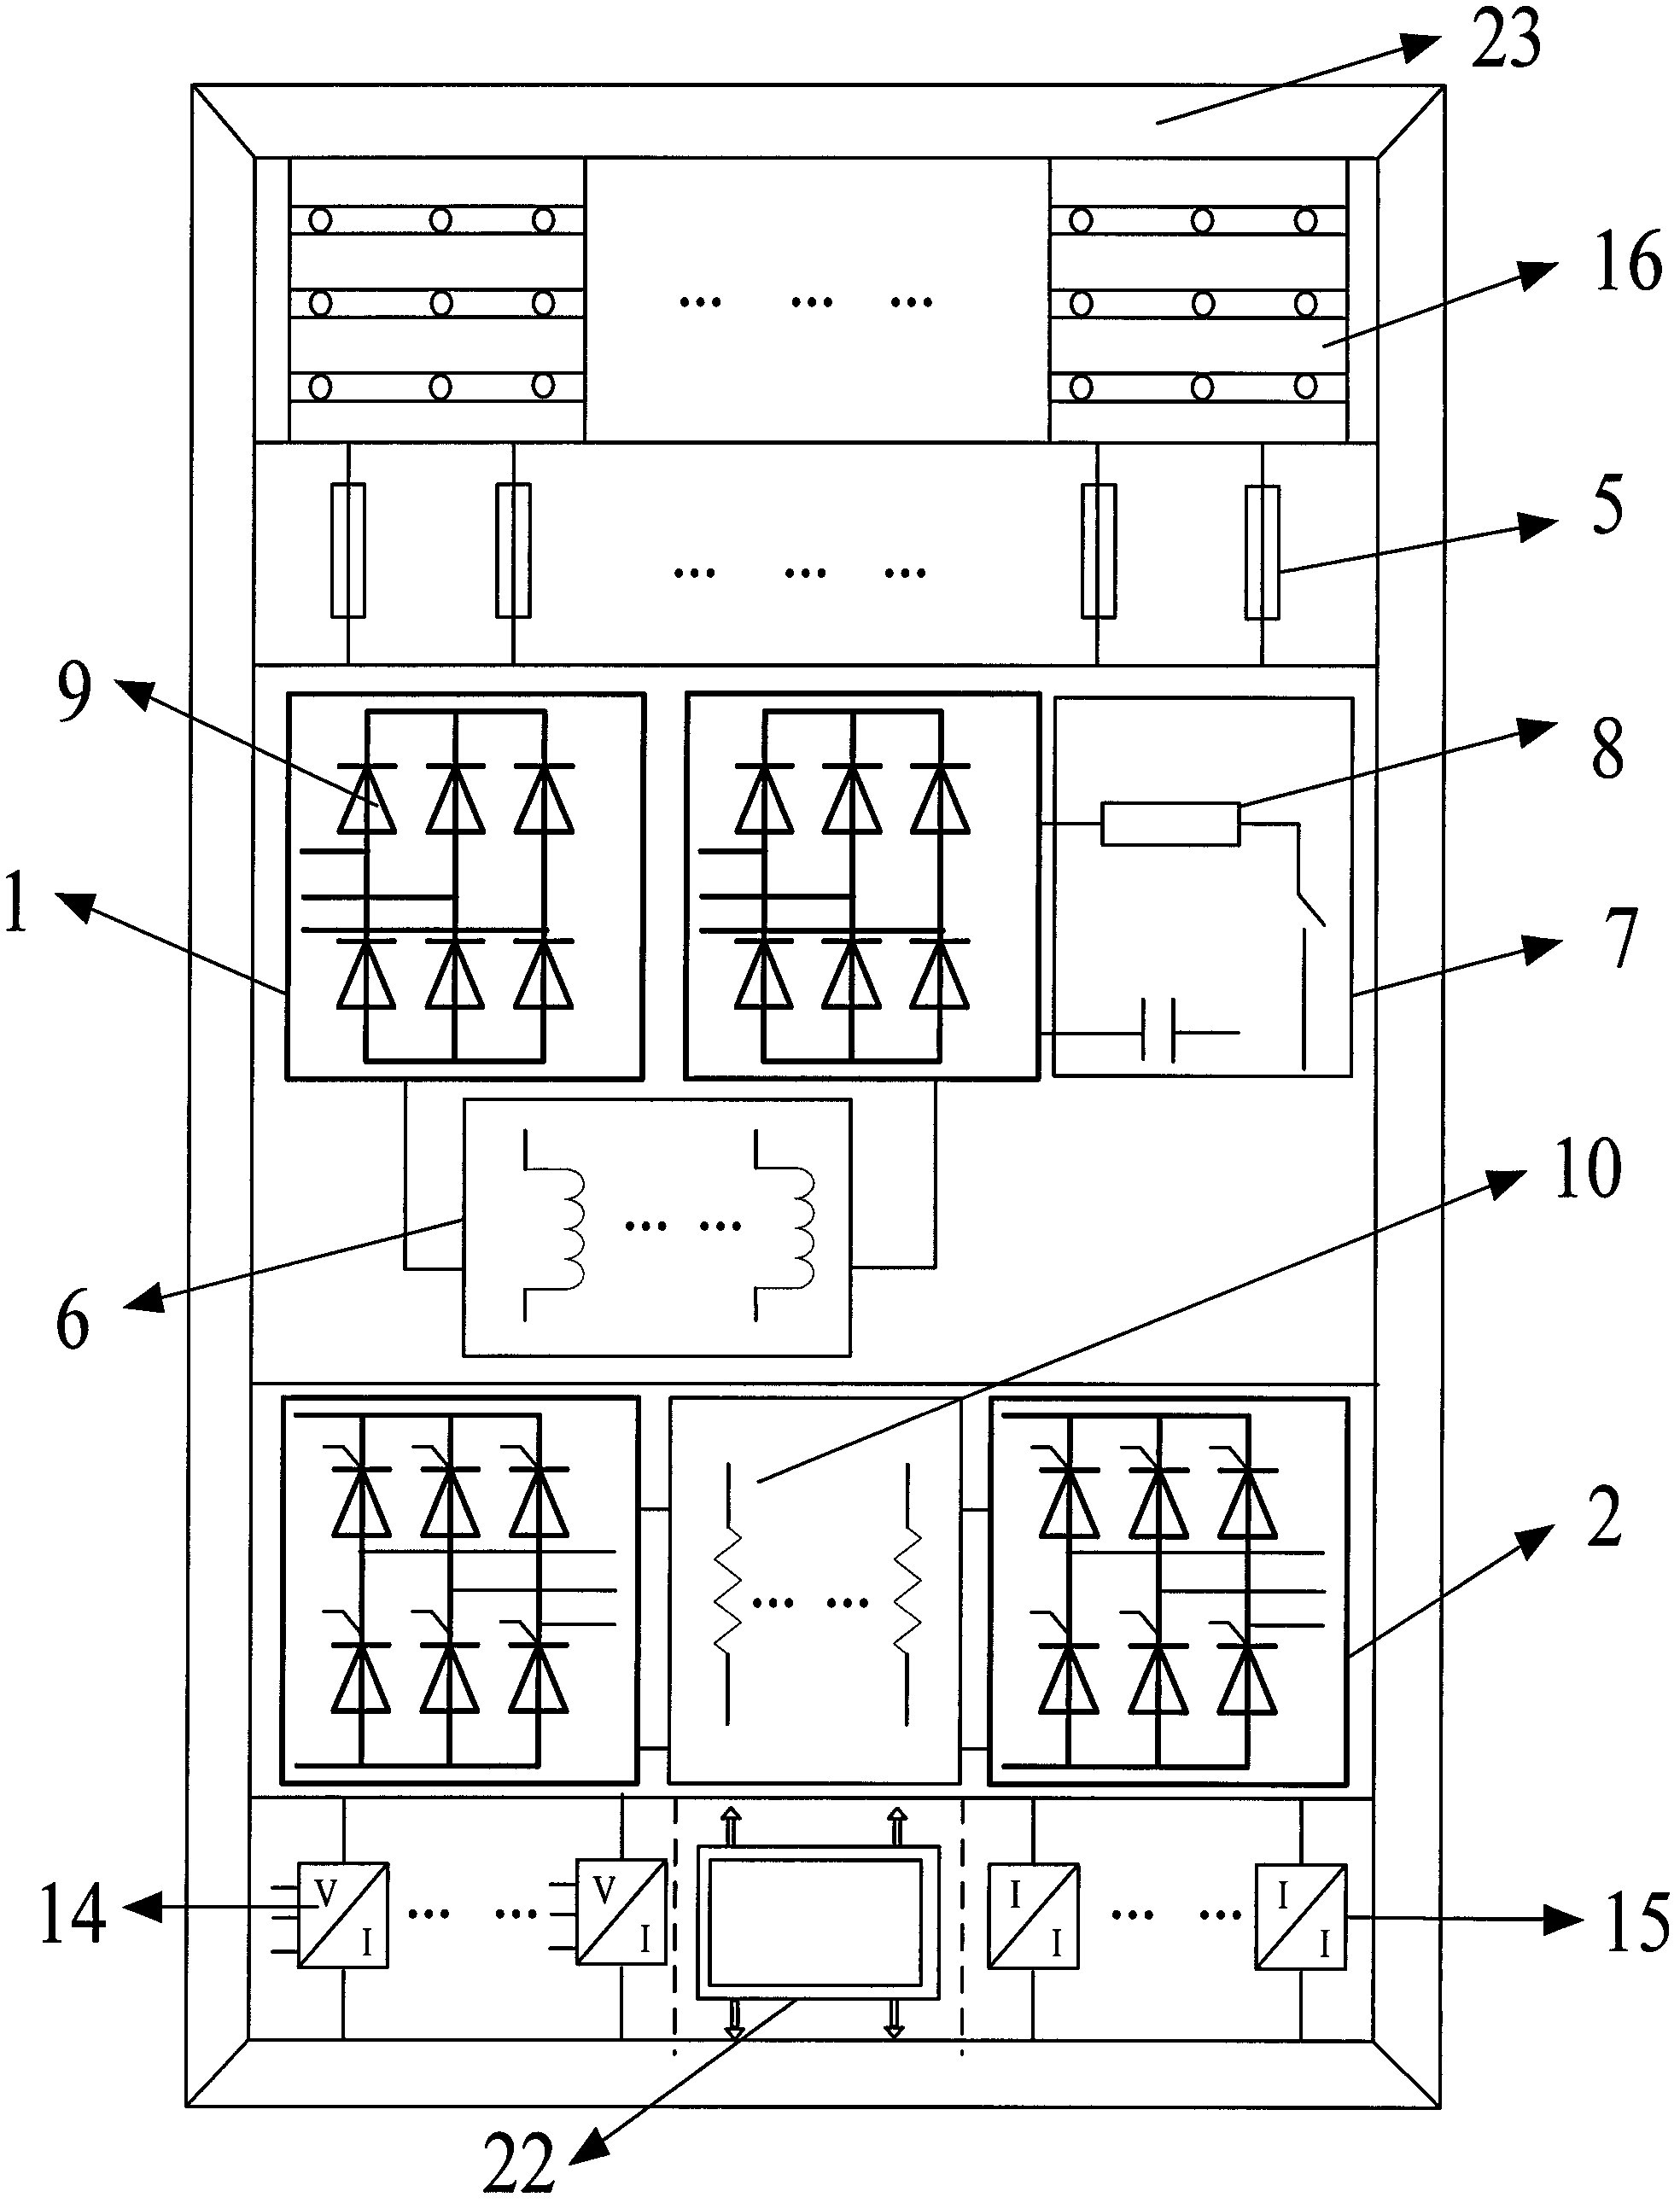 Multi-inverter module paralleling frequency conversion device for transmission system and control policy